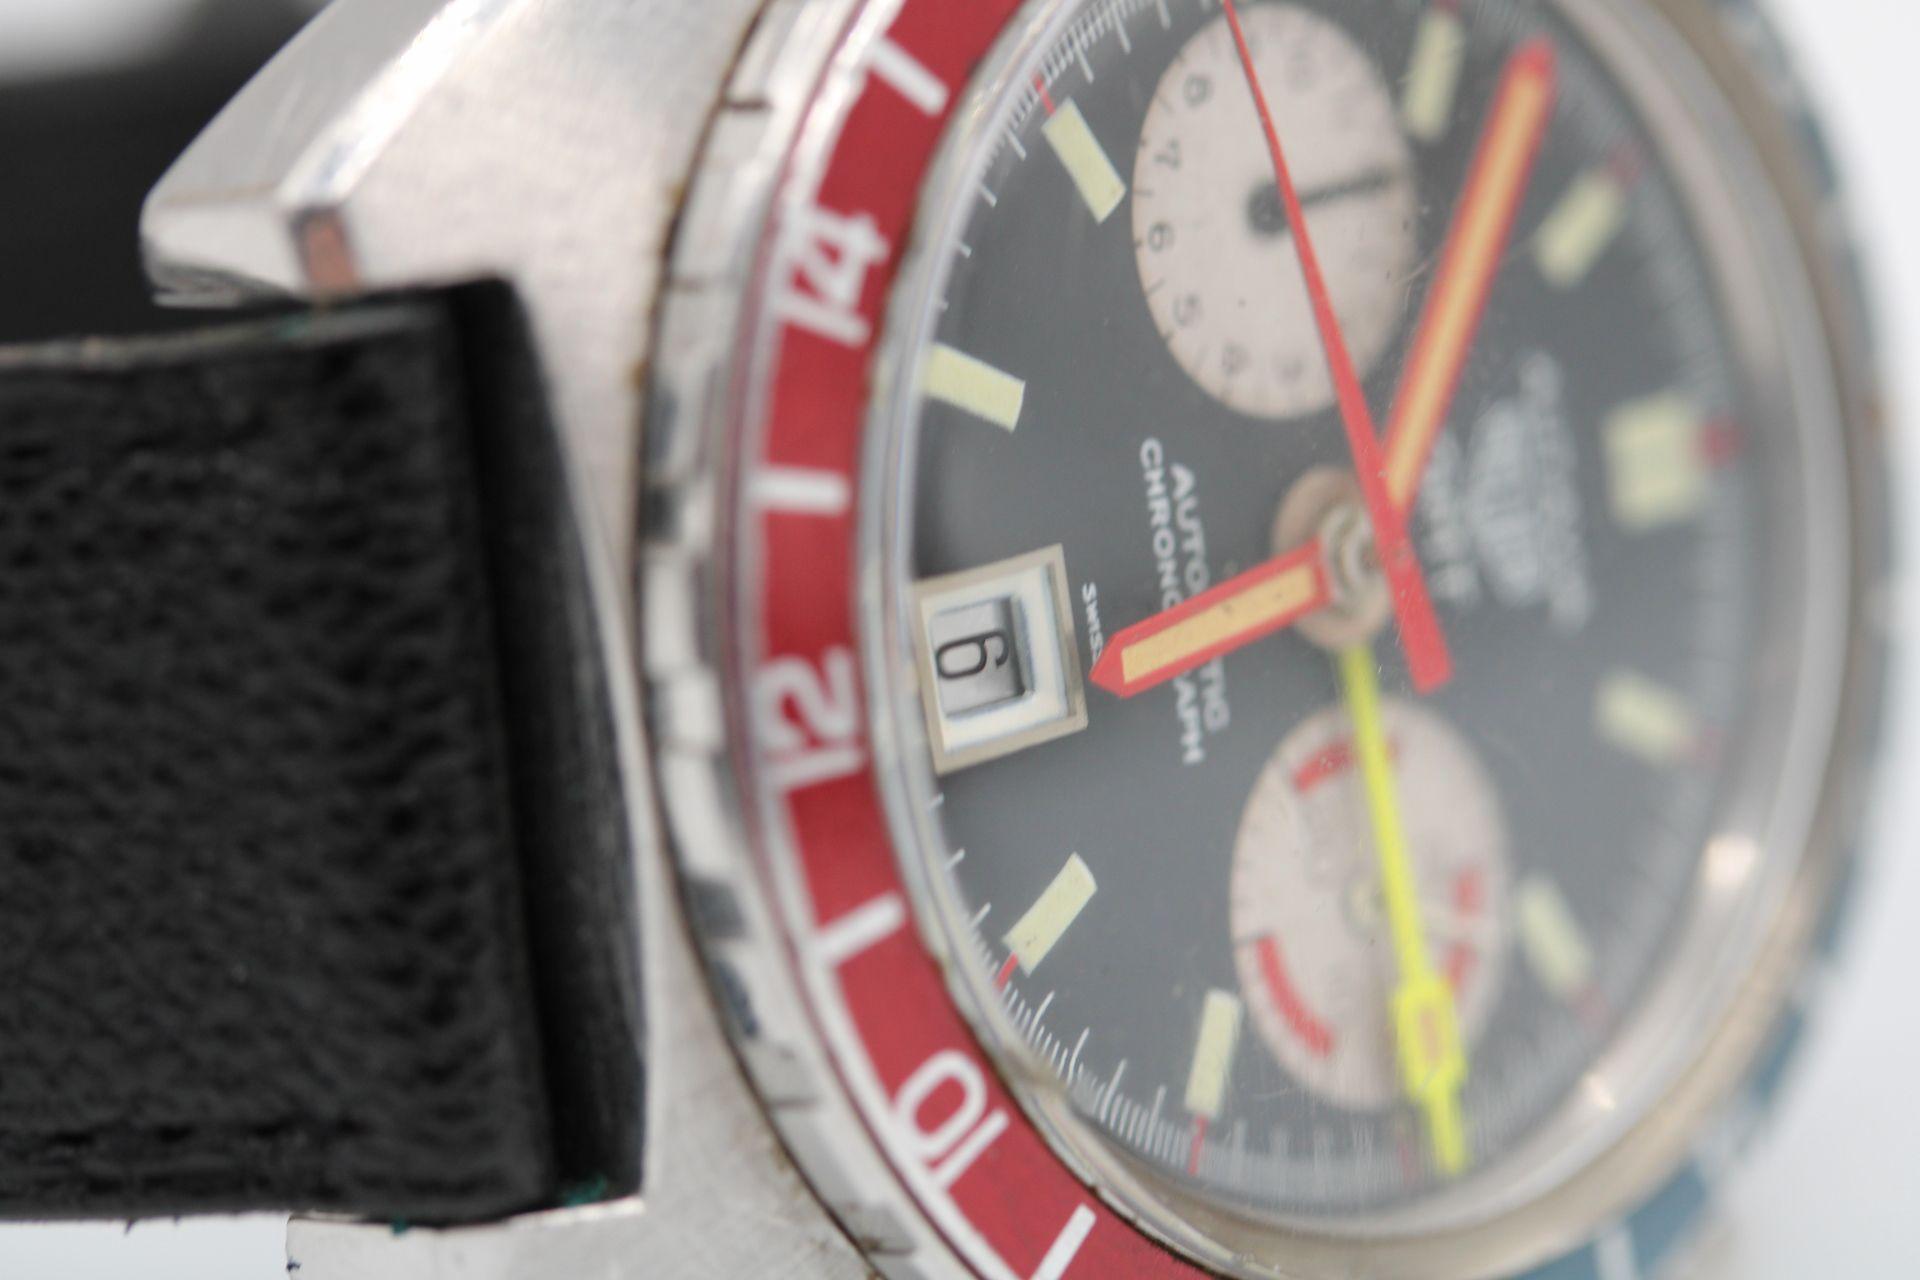 Heuer Autavia GMT 1163 In Fair Condition For Sale In London, GB